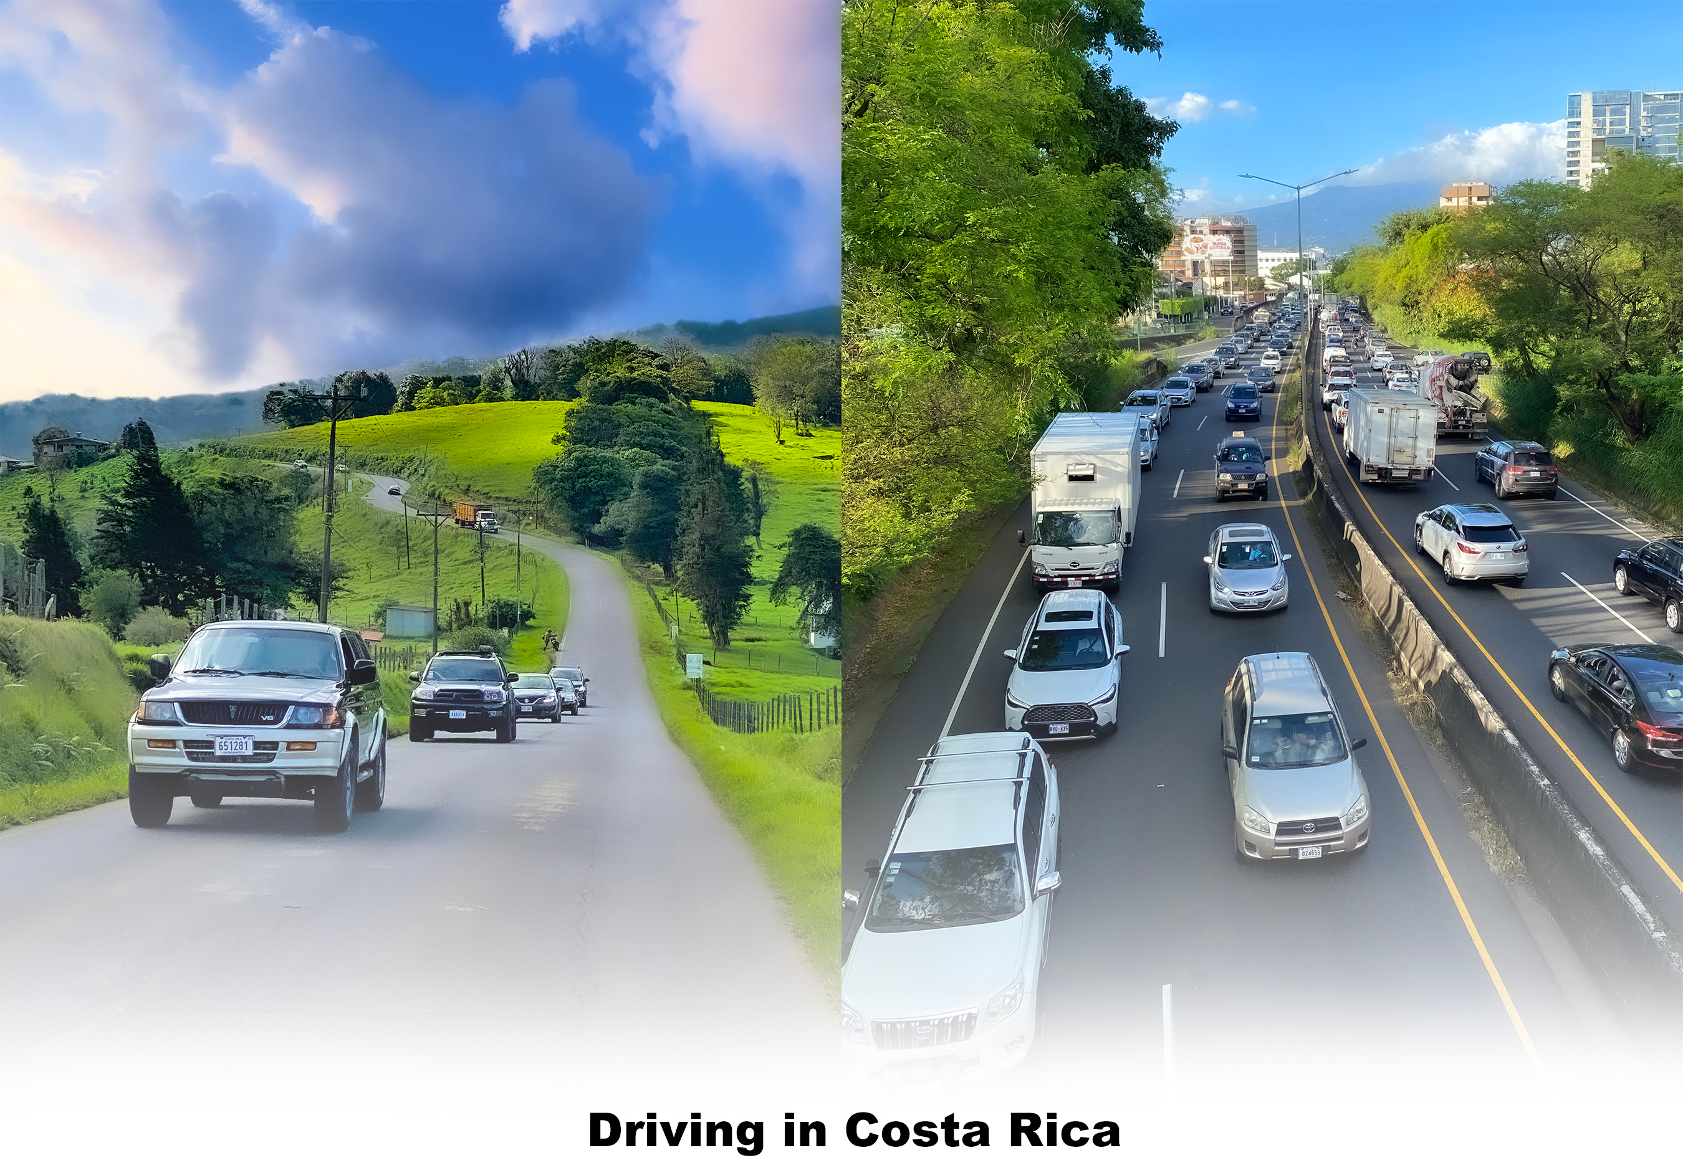 Image depicting driving in Costa Rica